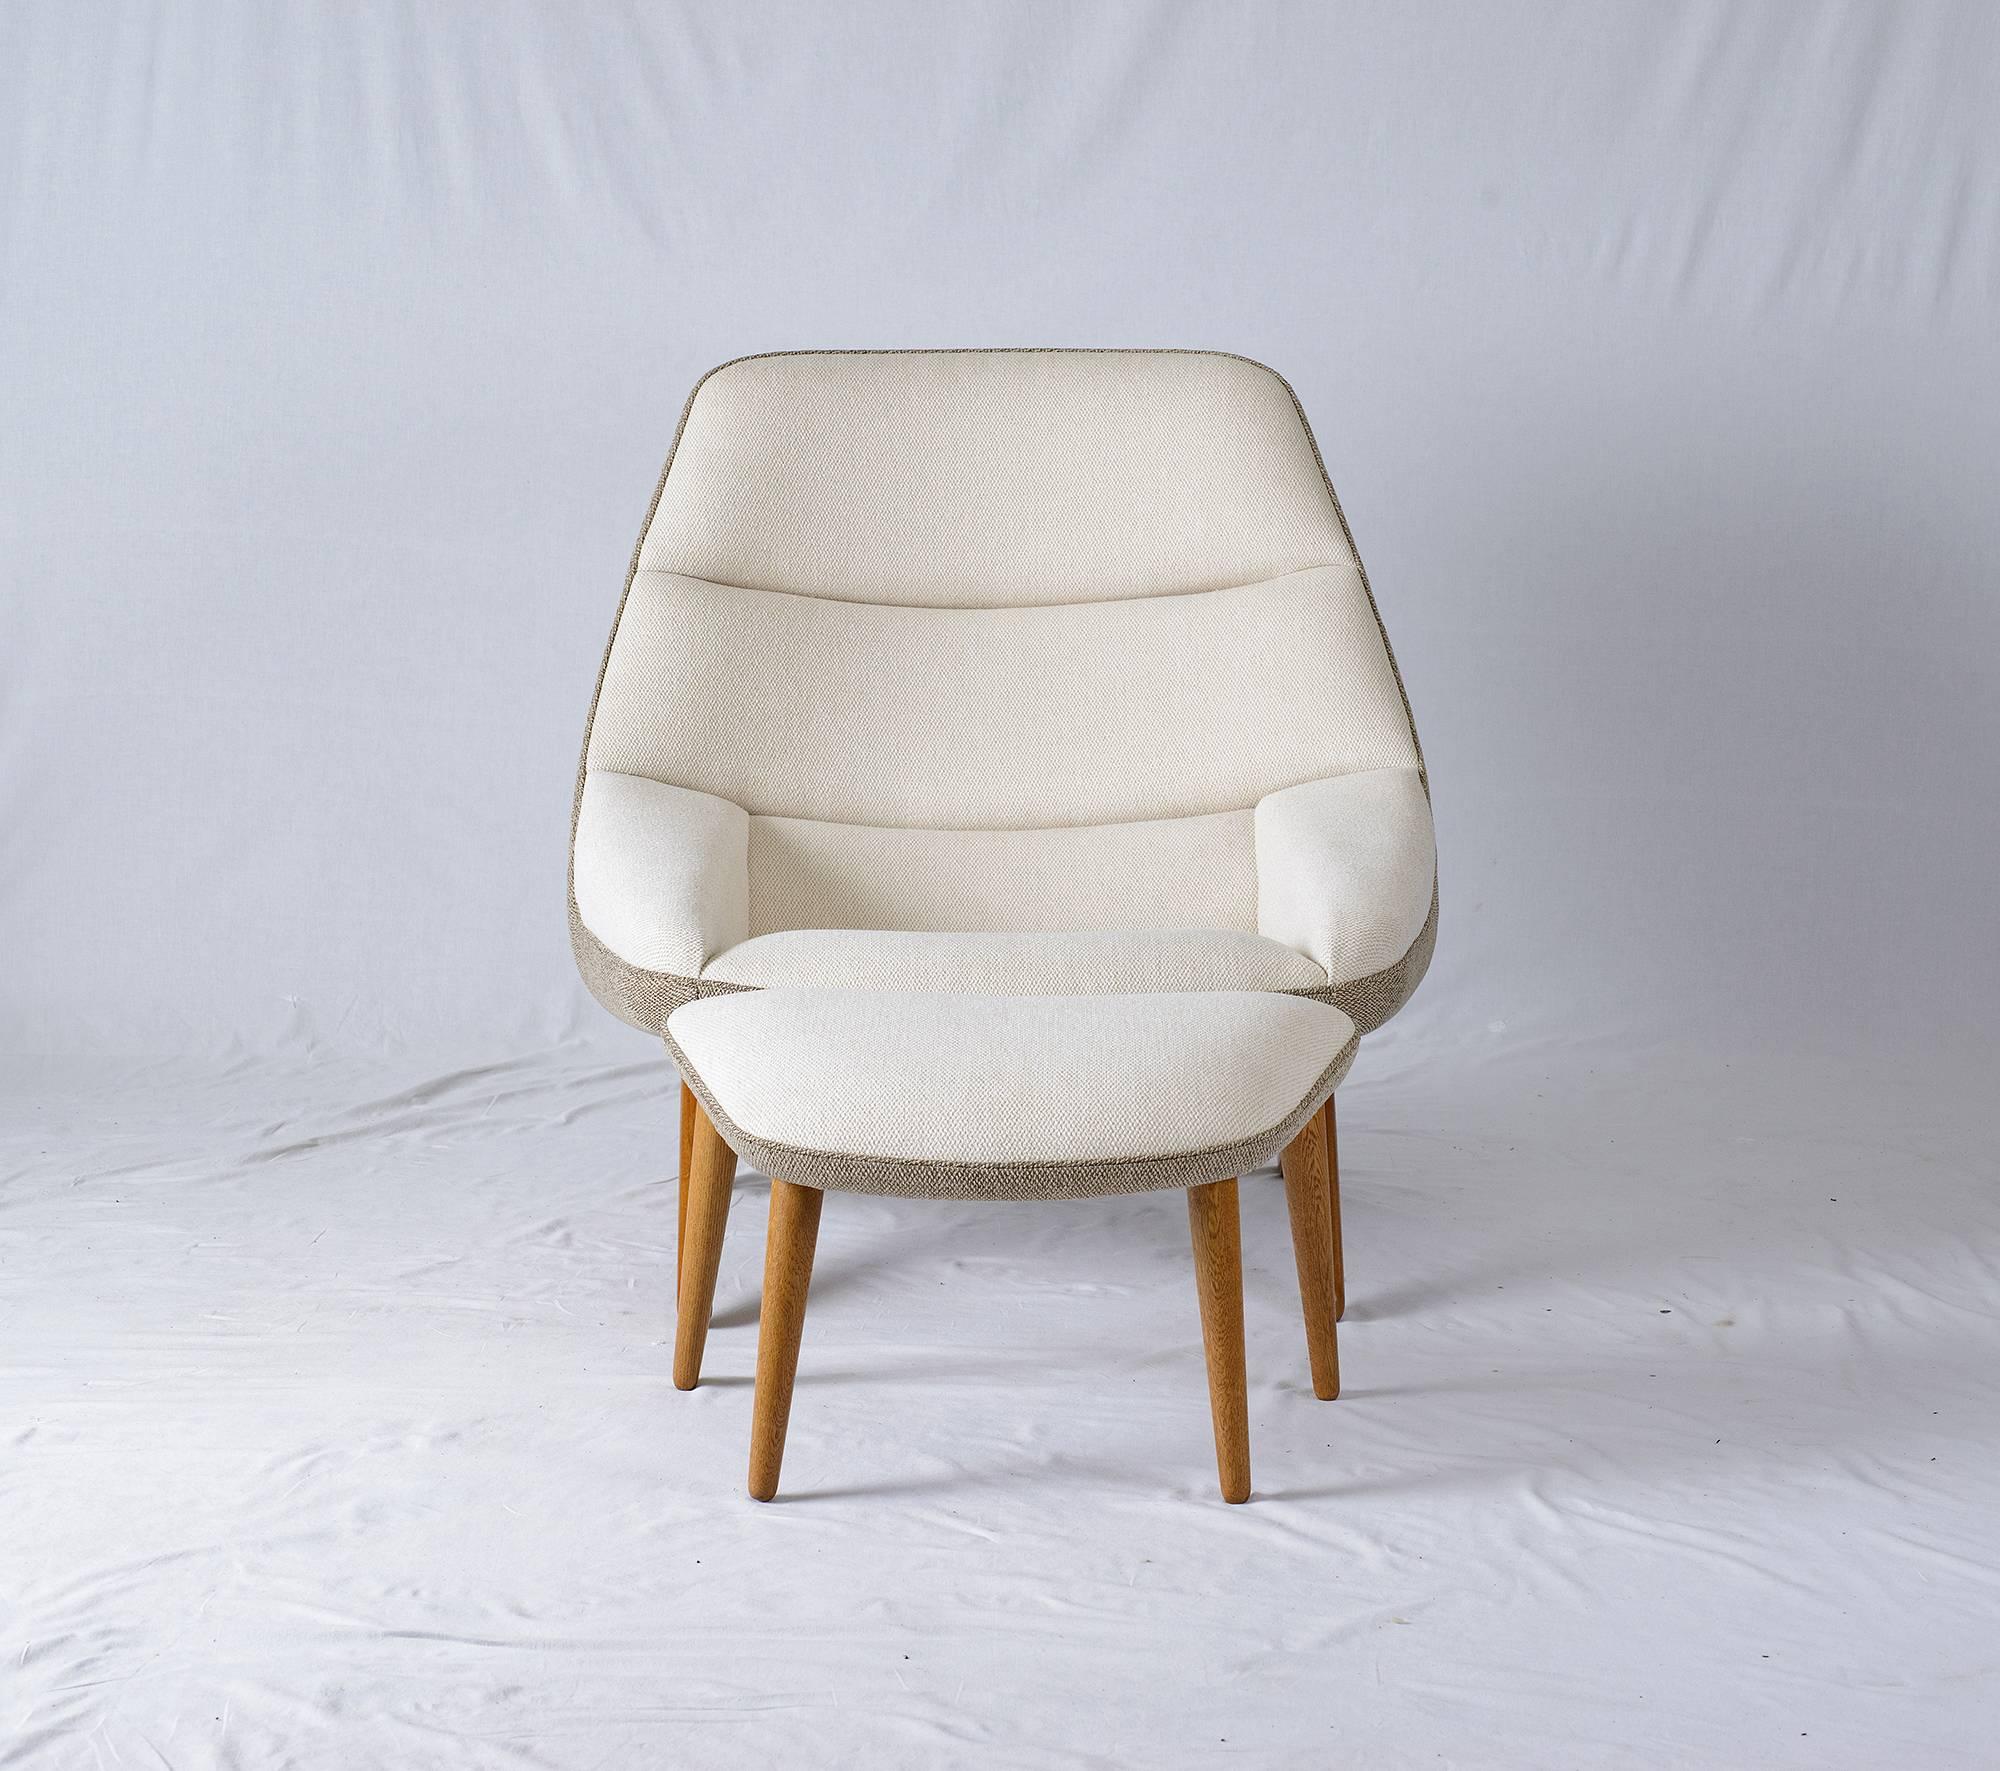 Illum Wikkelsø ML-91 lounge chair and footstool produced by A. Mikael Laursen.